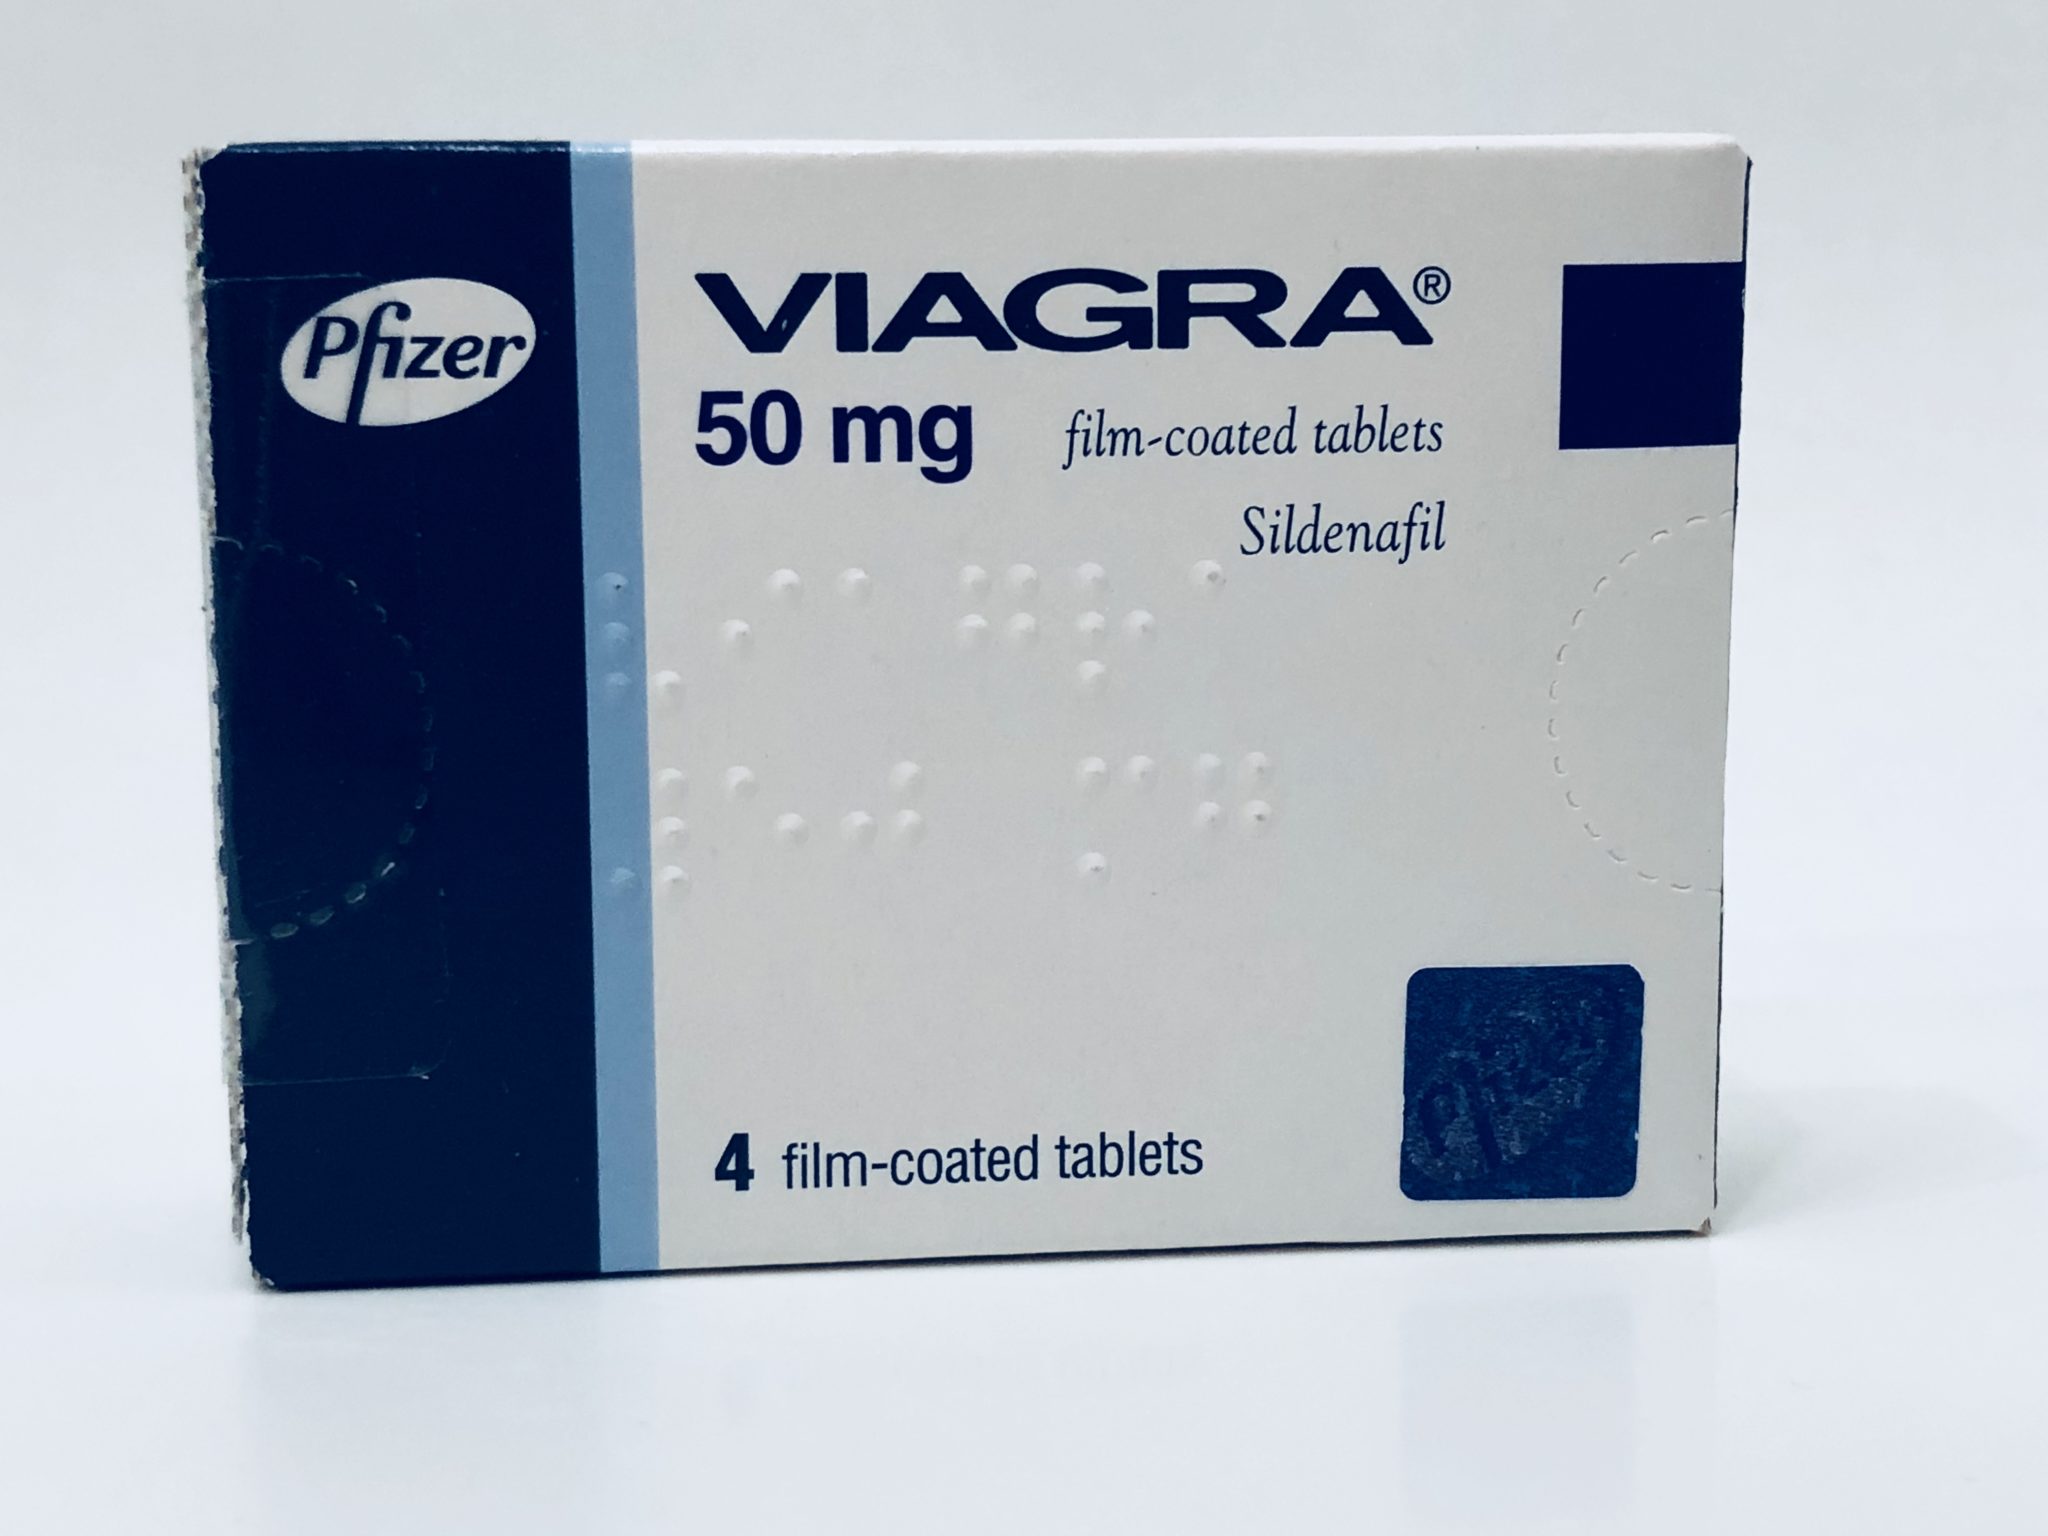 which dating sites get the best results from viagra